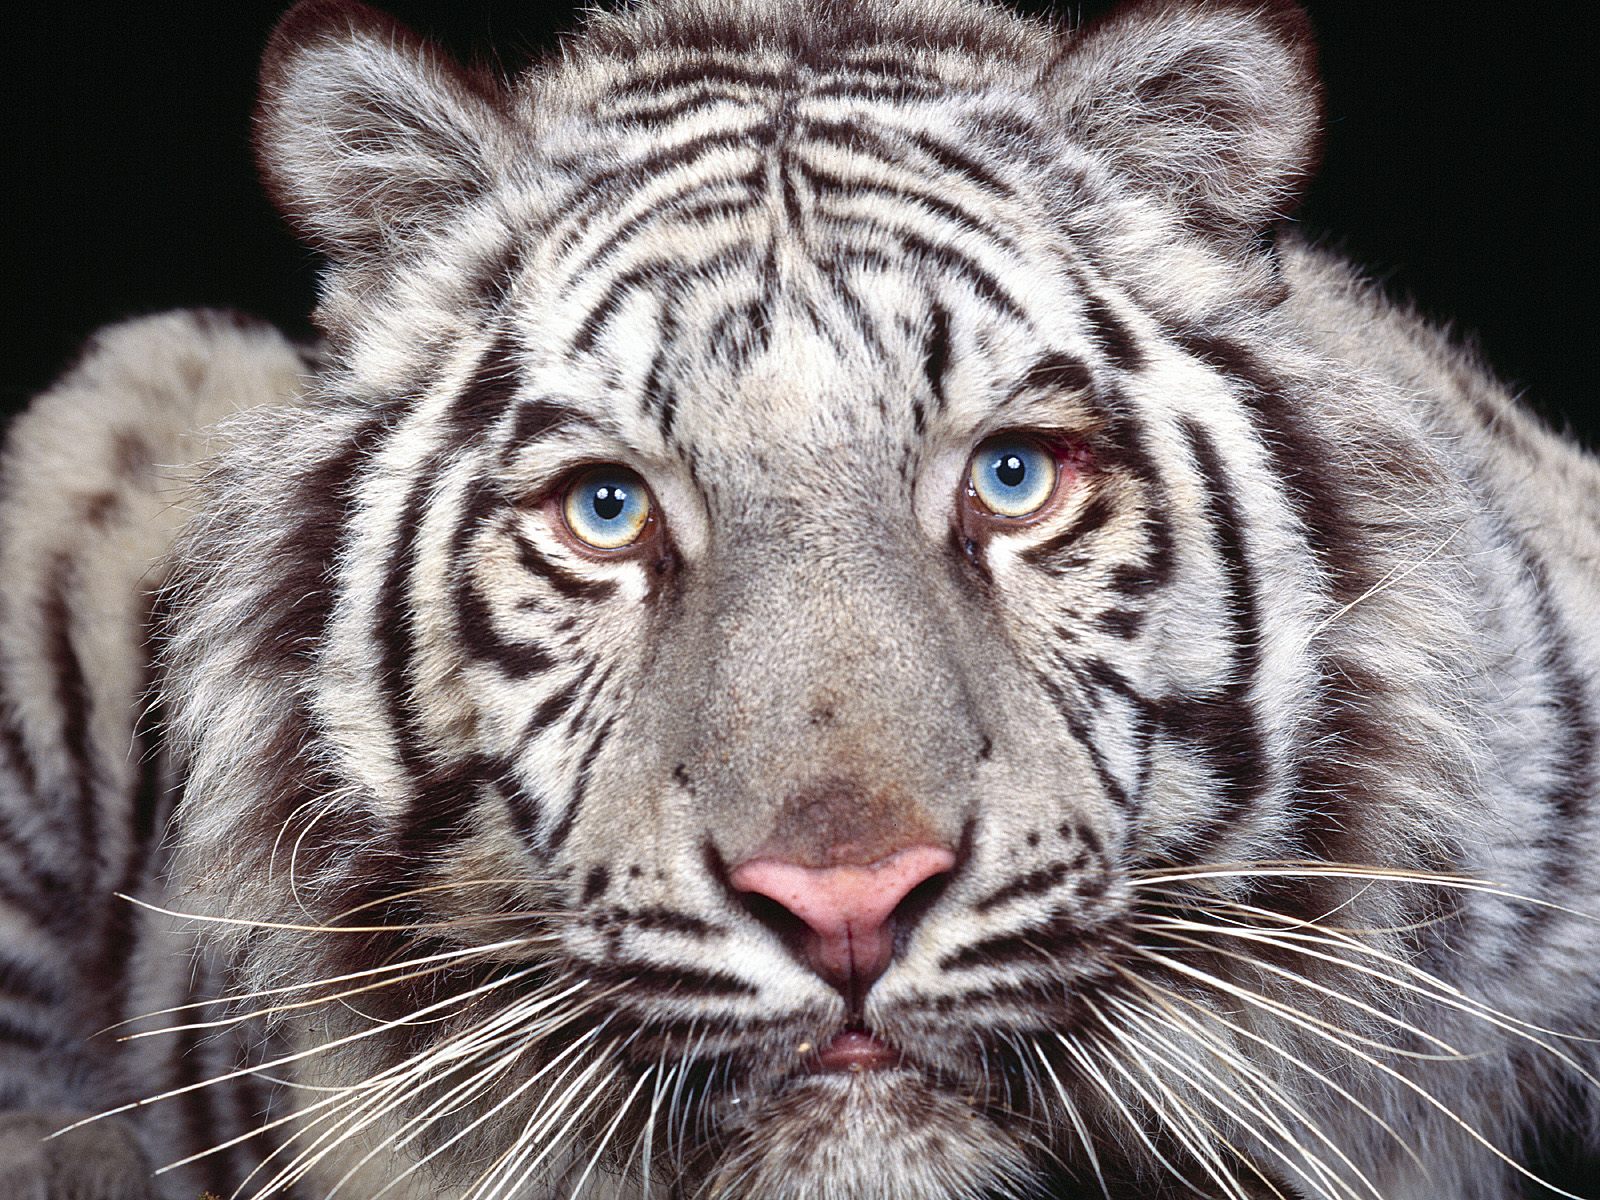 Image Gallary 3 Beautiful White Tiger Wallpapers for Desktop 1600x1200